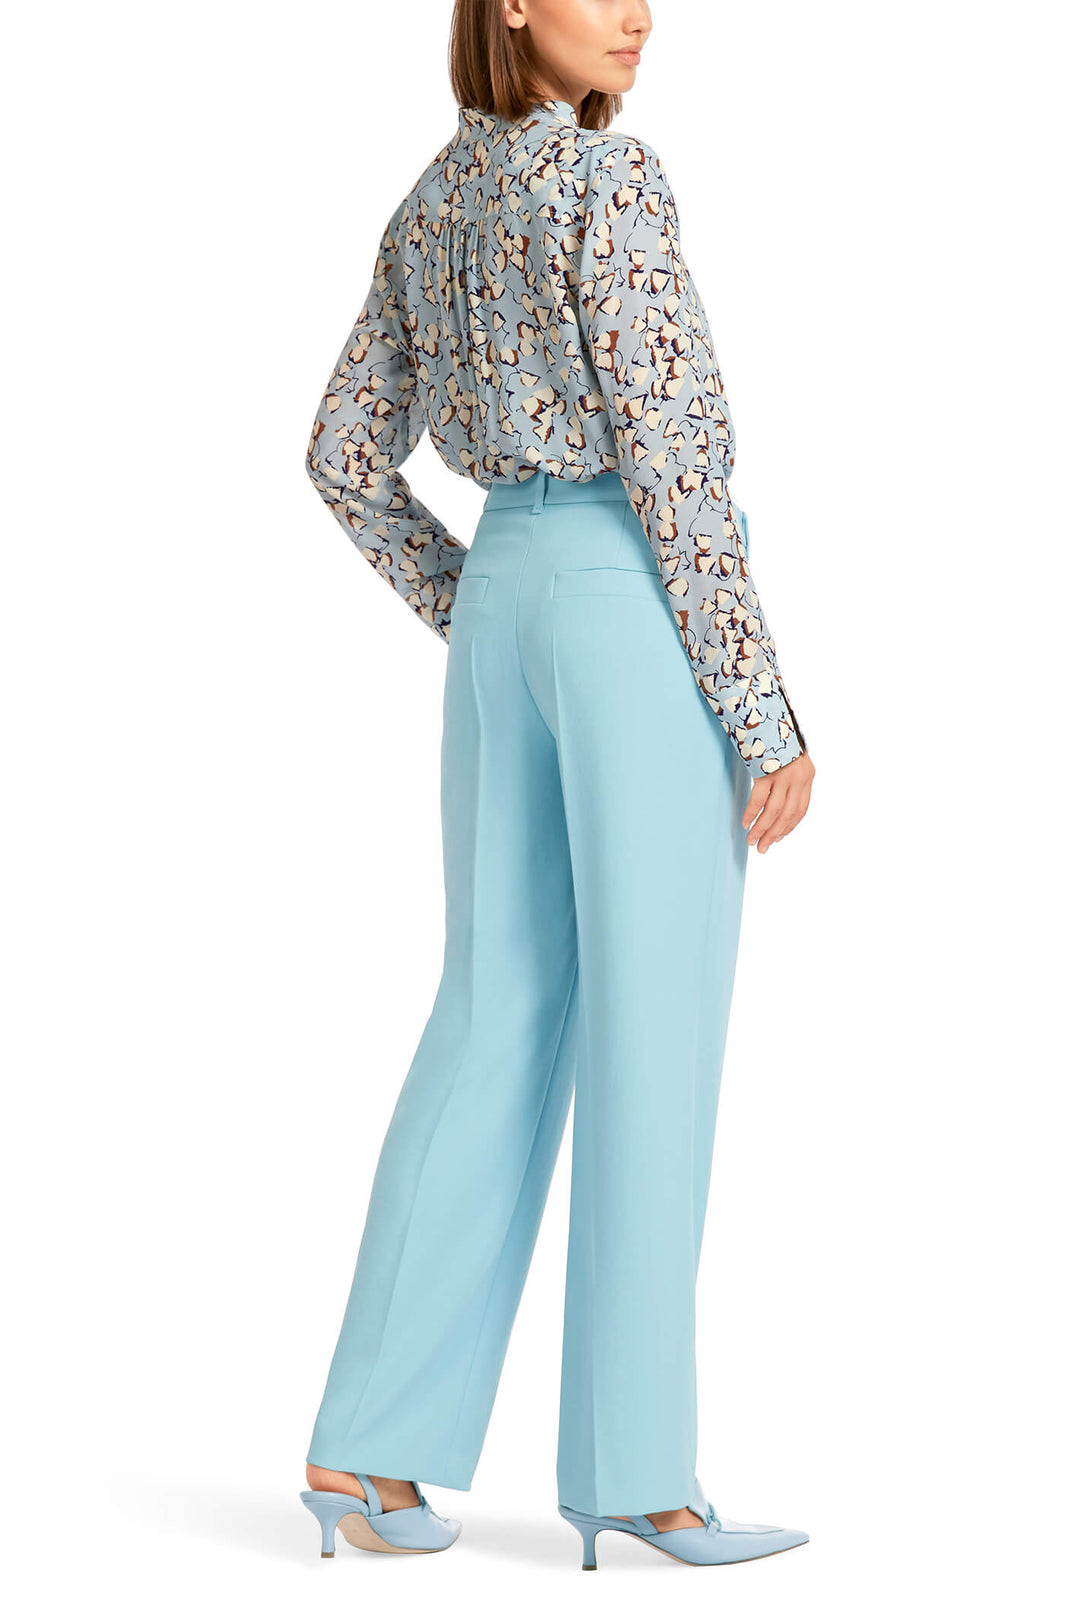 Marc Cain Collection UC 81.15 W03 Atmospheric Blue Wide Leg Trousers - Olivia Grace Fashion